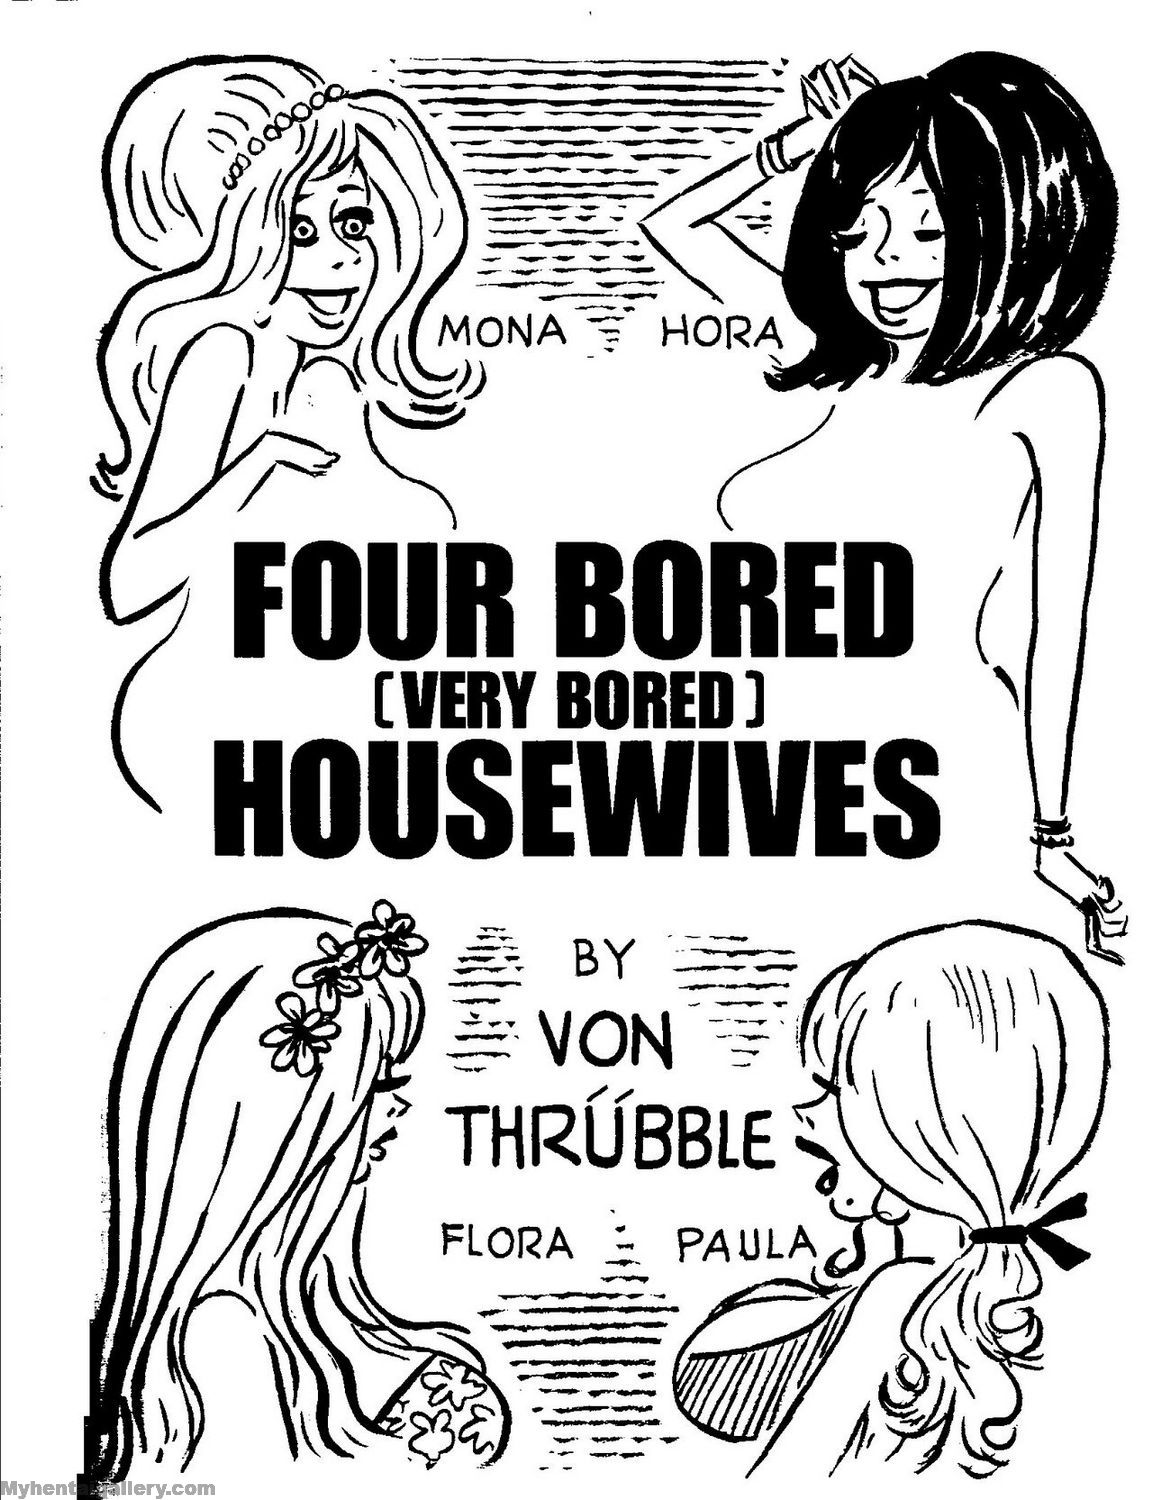 Four Very Bored Housewives 4 - Paula Milking Time